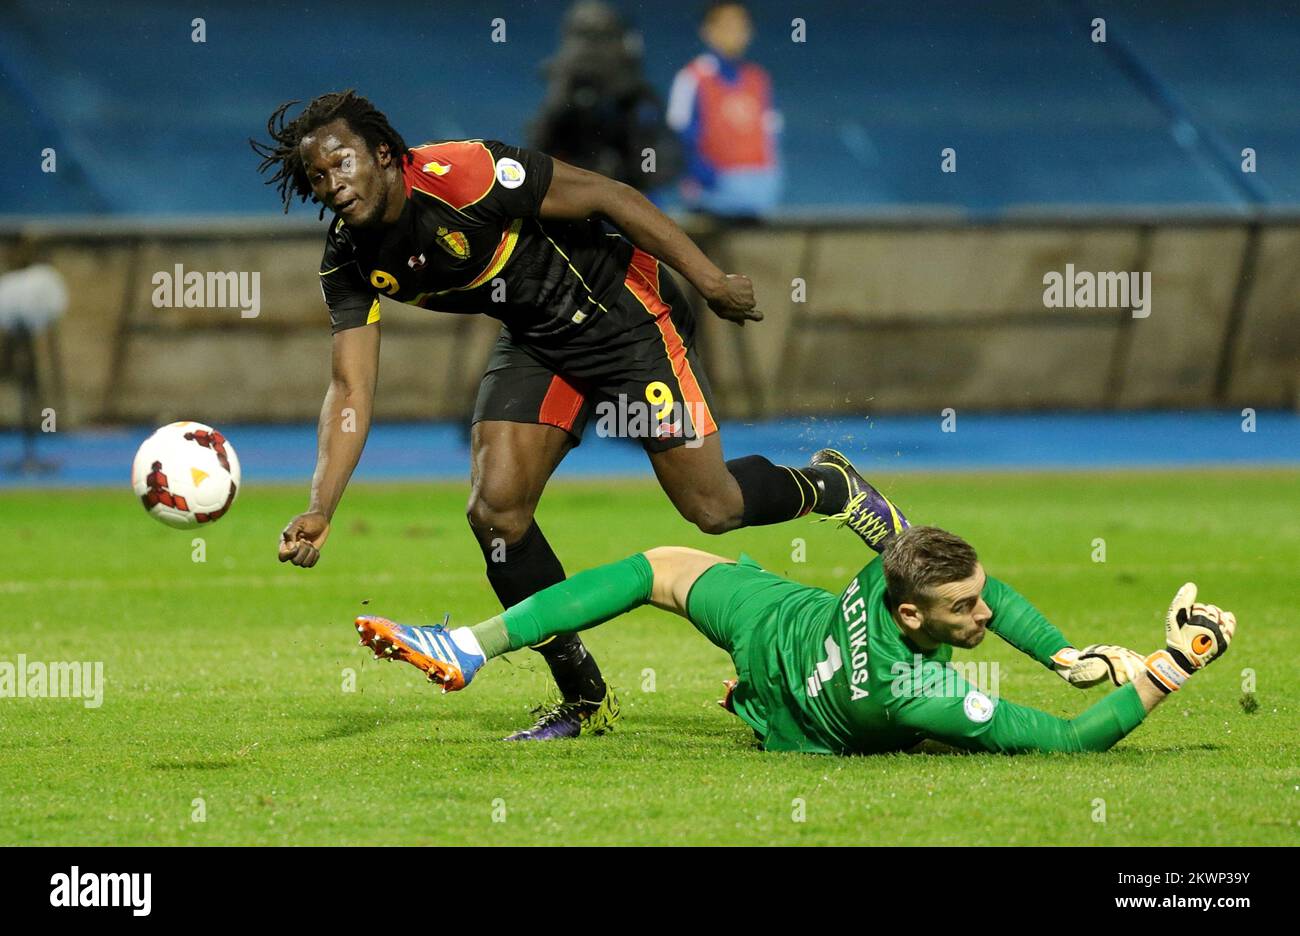 Qualifying match for the World Cup 2014th In Brazil, Group A, Croatia - Belgium. Romelu Lukaku (left) and goalkeeper Stipe Pletikosa in action Stock Photo